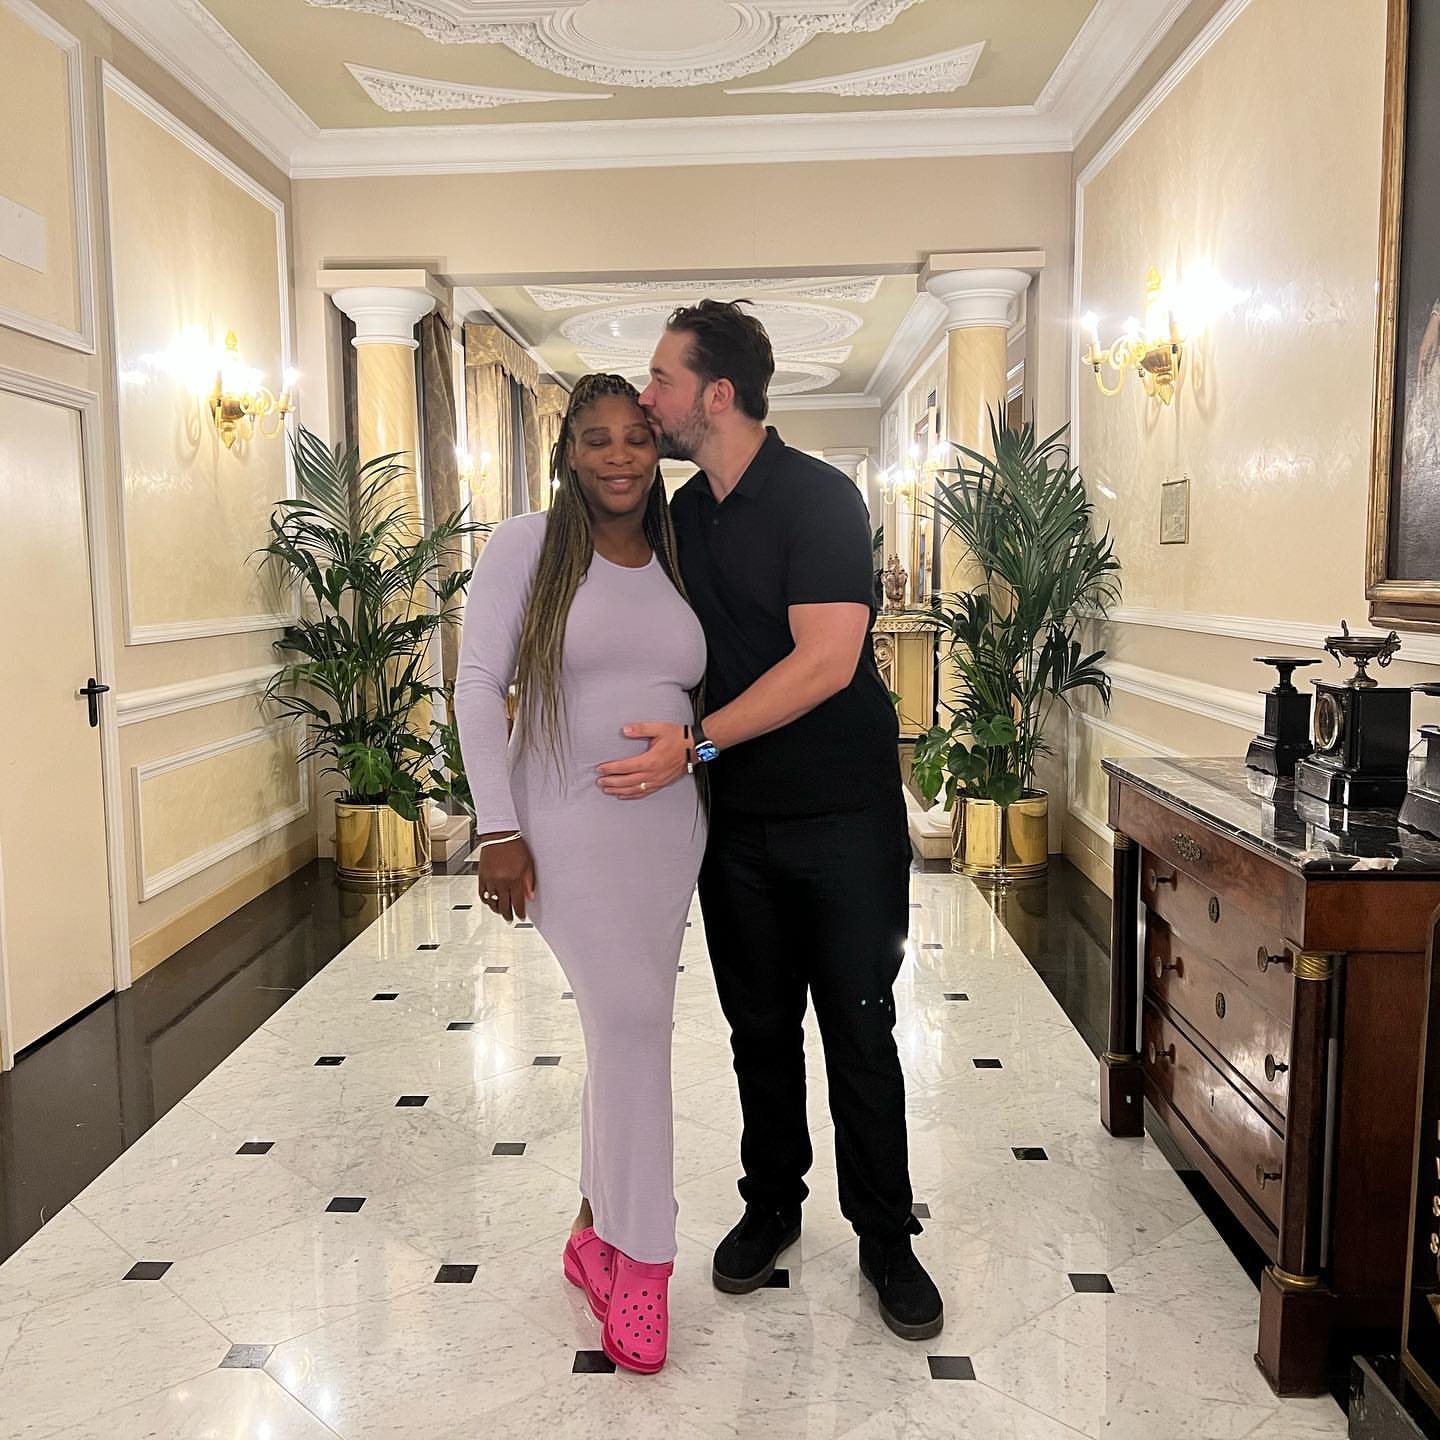 Photos n°6 : Serena Williams Shares Her Big Reveal!